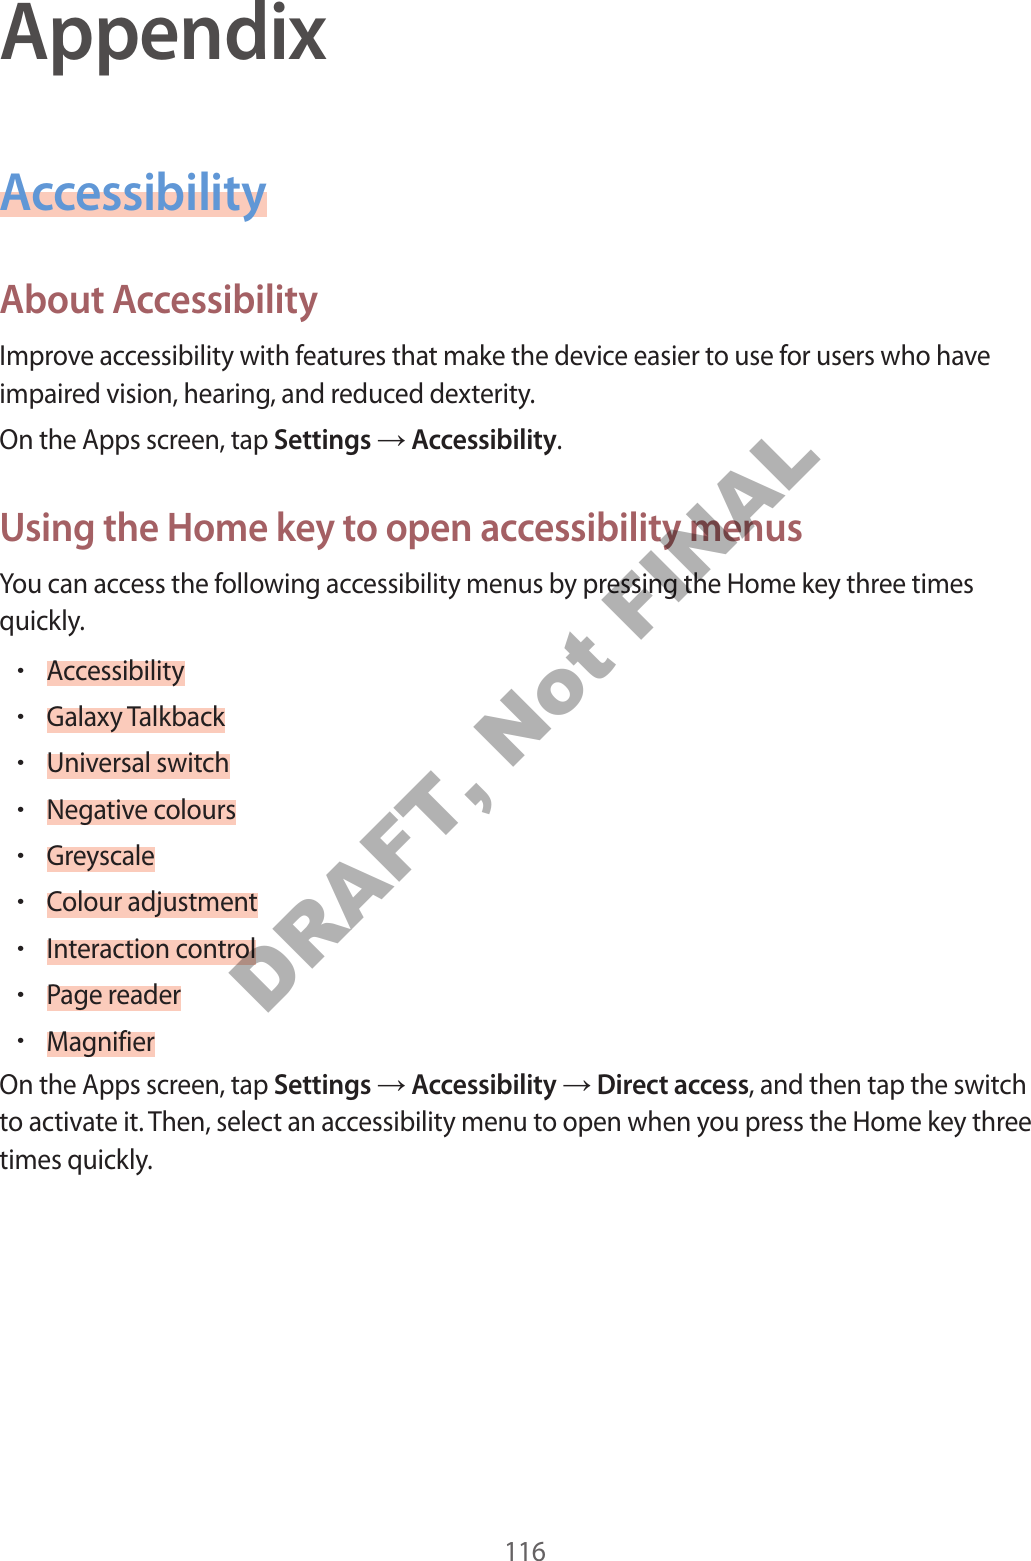 116AppendixAccessibilityAbout AccessibilityImprove accessibility with features that make the device easier to use for users who have impaired vision, hearing, and reduced dexterity.On the Apps screen, tap Settings ĺ Accessibility.Using the Home key to open accessibility menusYou can access the following accessibility menus by pressing the Home key three times quickly.•Accessibility•Galaxy Talkback•Universal switch•Negative colours•Greyscale•Colour adjustment•Interaction control•Page reader•MagnifierOn the Apps screen, tap Settings ĺ Accessibility ĺ Direct access, and then tap the switch to activate it. Then, select an accessibility menu to open when you press the Home key three times quickly.DRAFT, Not FINAL